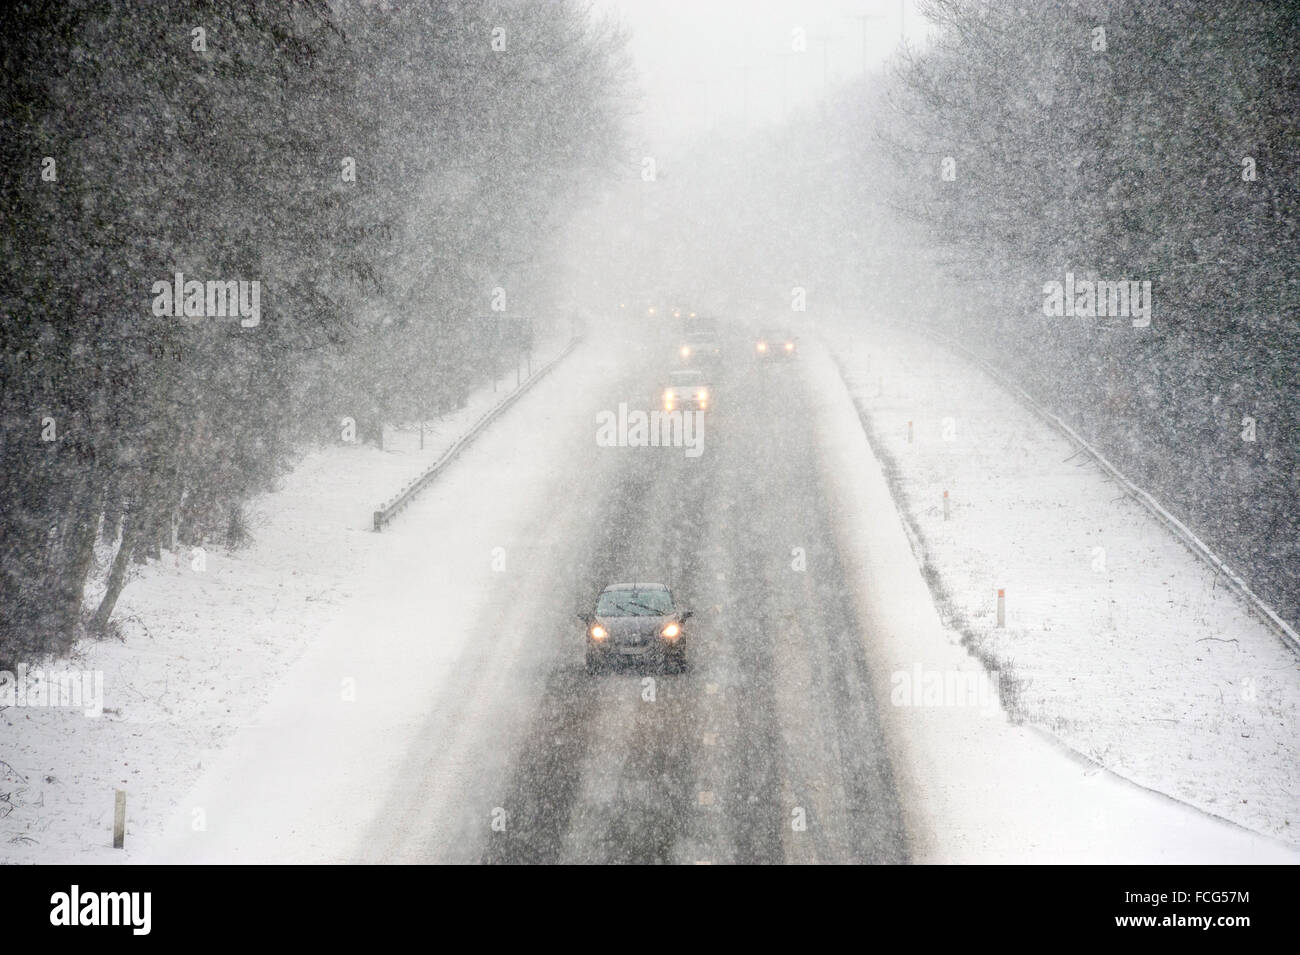 Highway in snowstorm with cars moving slowly on snowy road surface Stock Photo